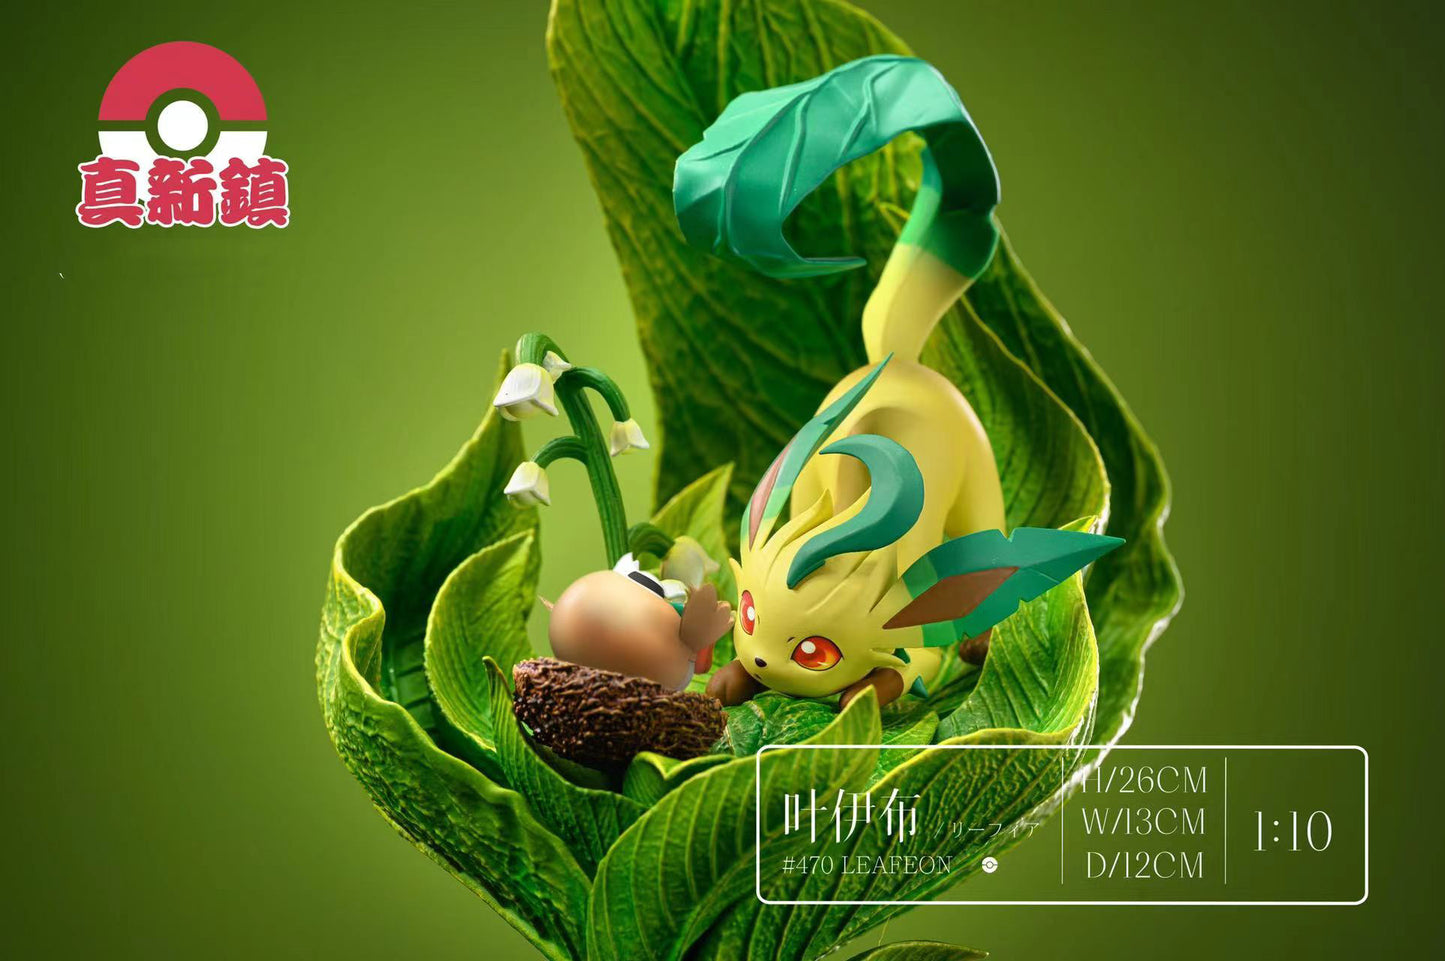 [PREORDER CLOSED] 1/10 Scale Figure [PALLET TOWN] - GLACEON & LEAFEON & SYLVEON Statue